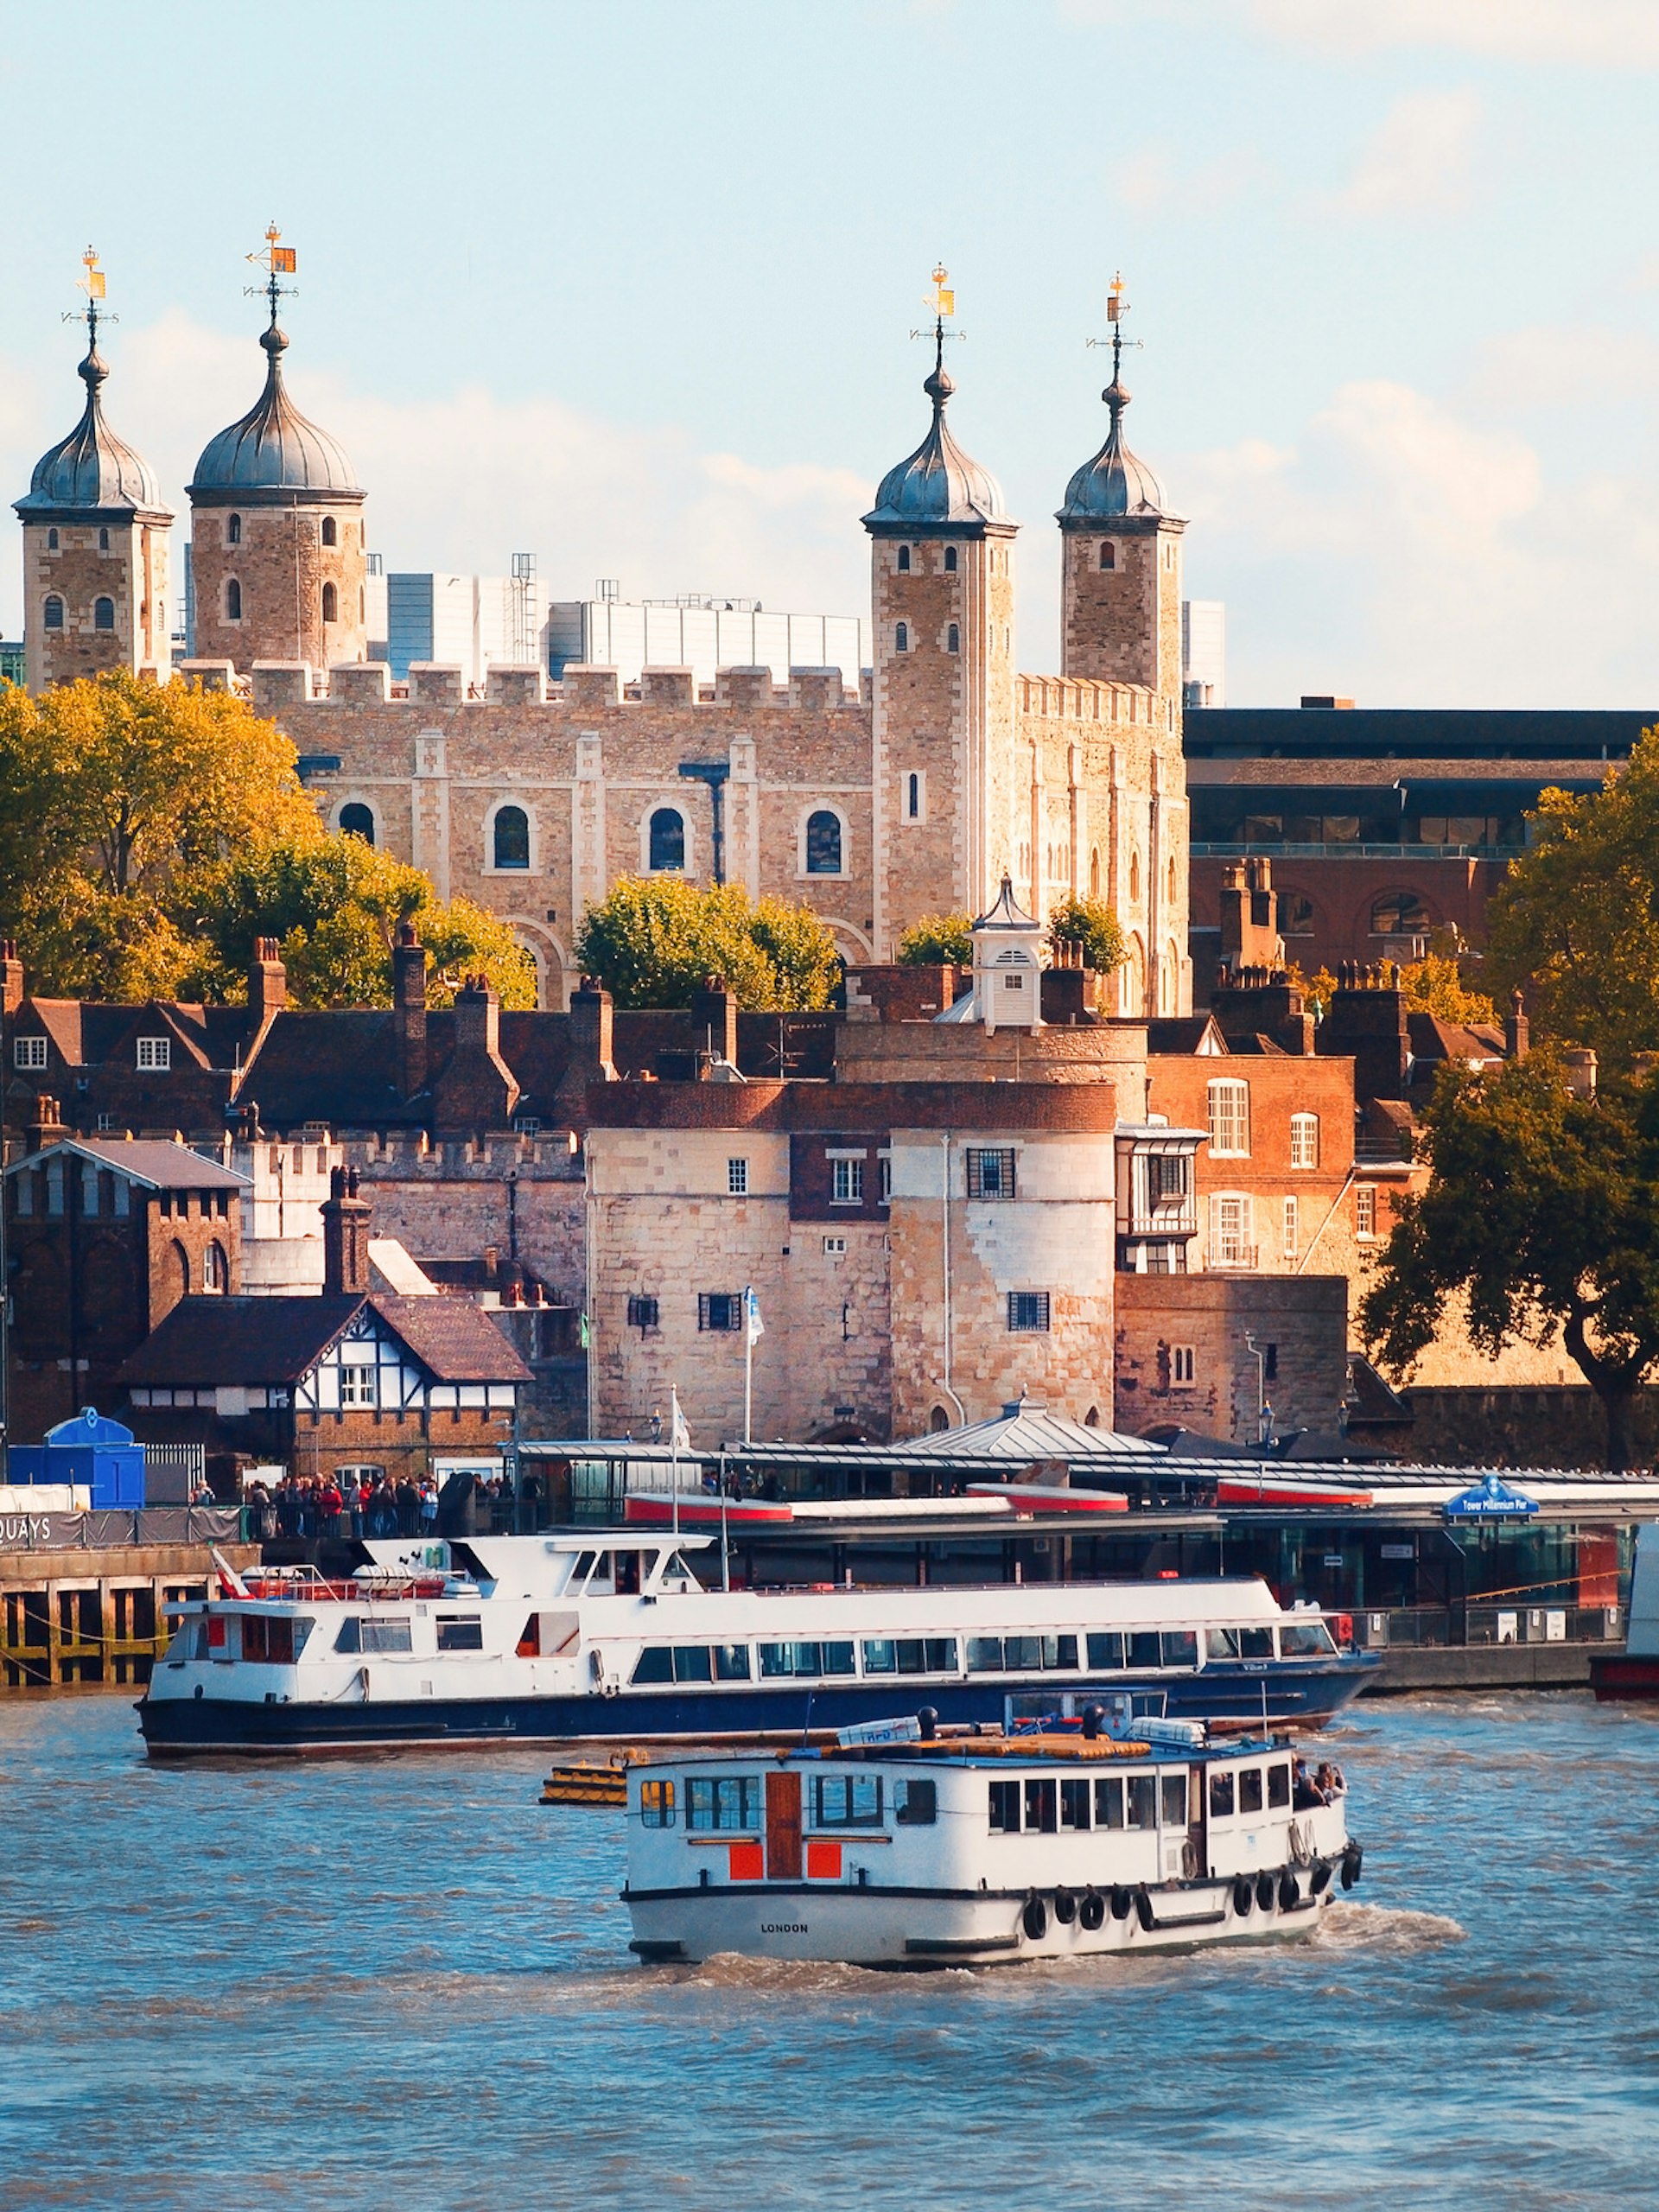 The White Tower if the oldest part of the Tower of London and overlooks the River Thames.